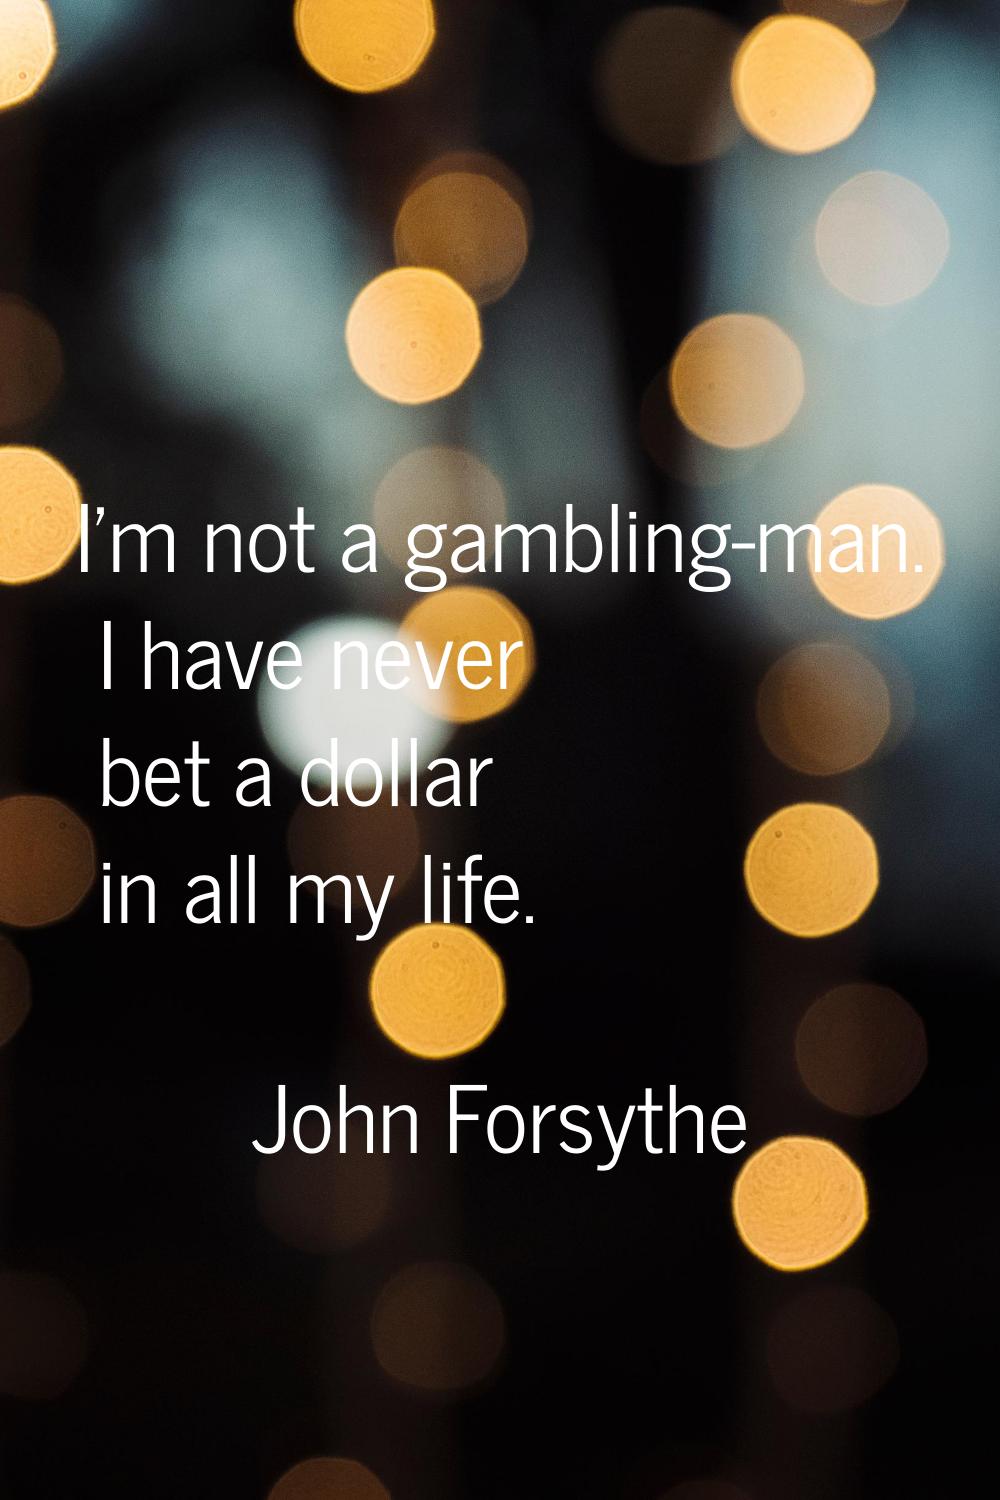 I'm not a gambling-man. I have never bet a dollar in all my life.